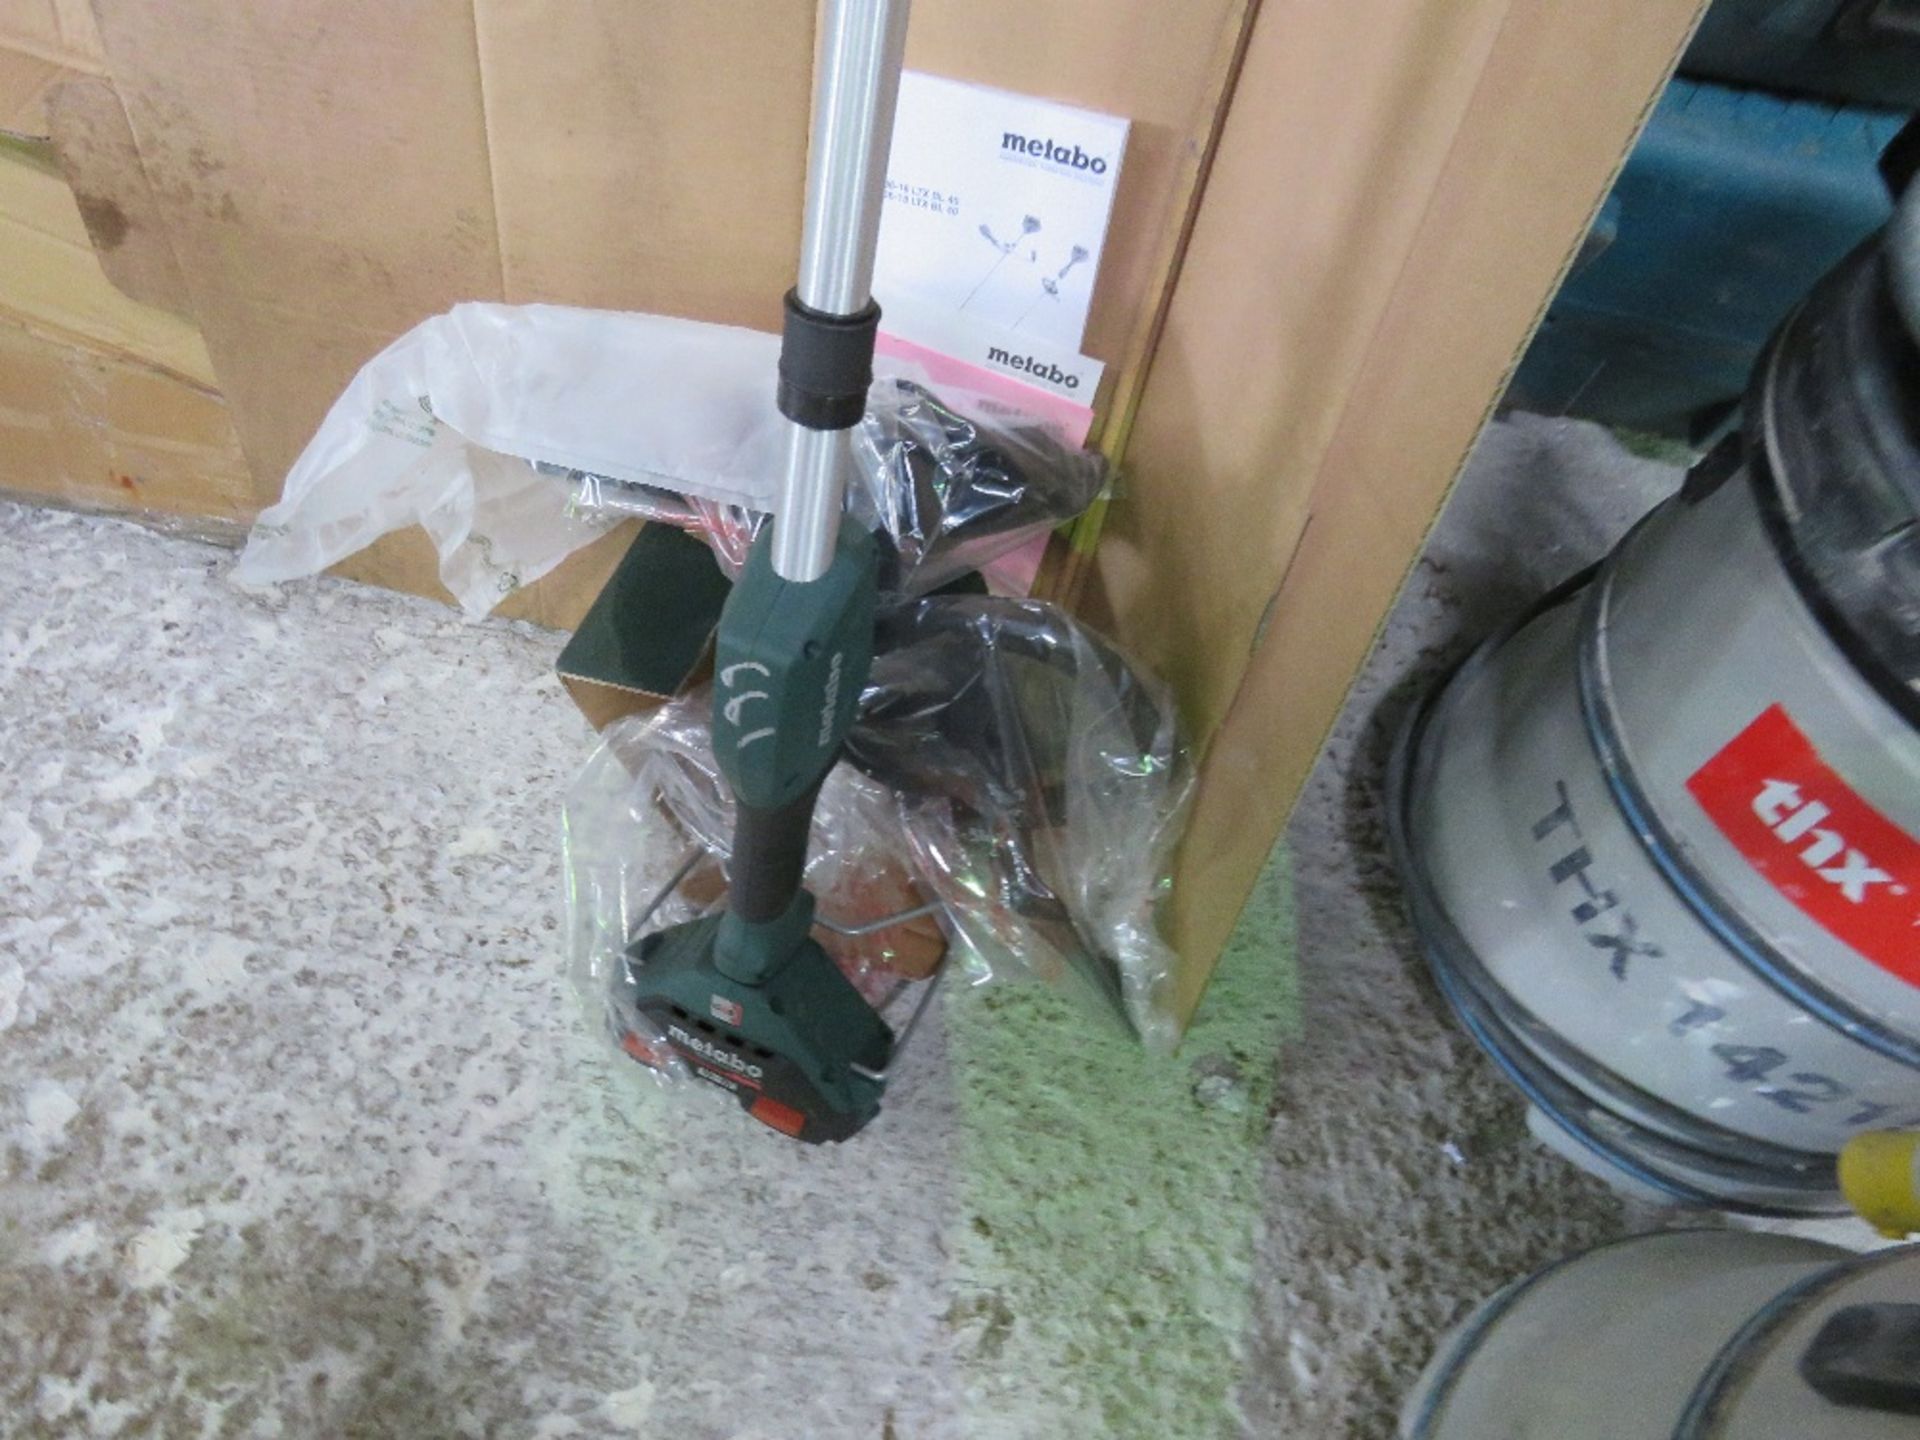 2 X METABO STRAIGHT SHAFT HD 36VOLT BATTERY BRUSH CUTTERS/STRIMMERS, NO BATTERIES, UNUSED. THIS L